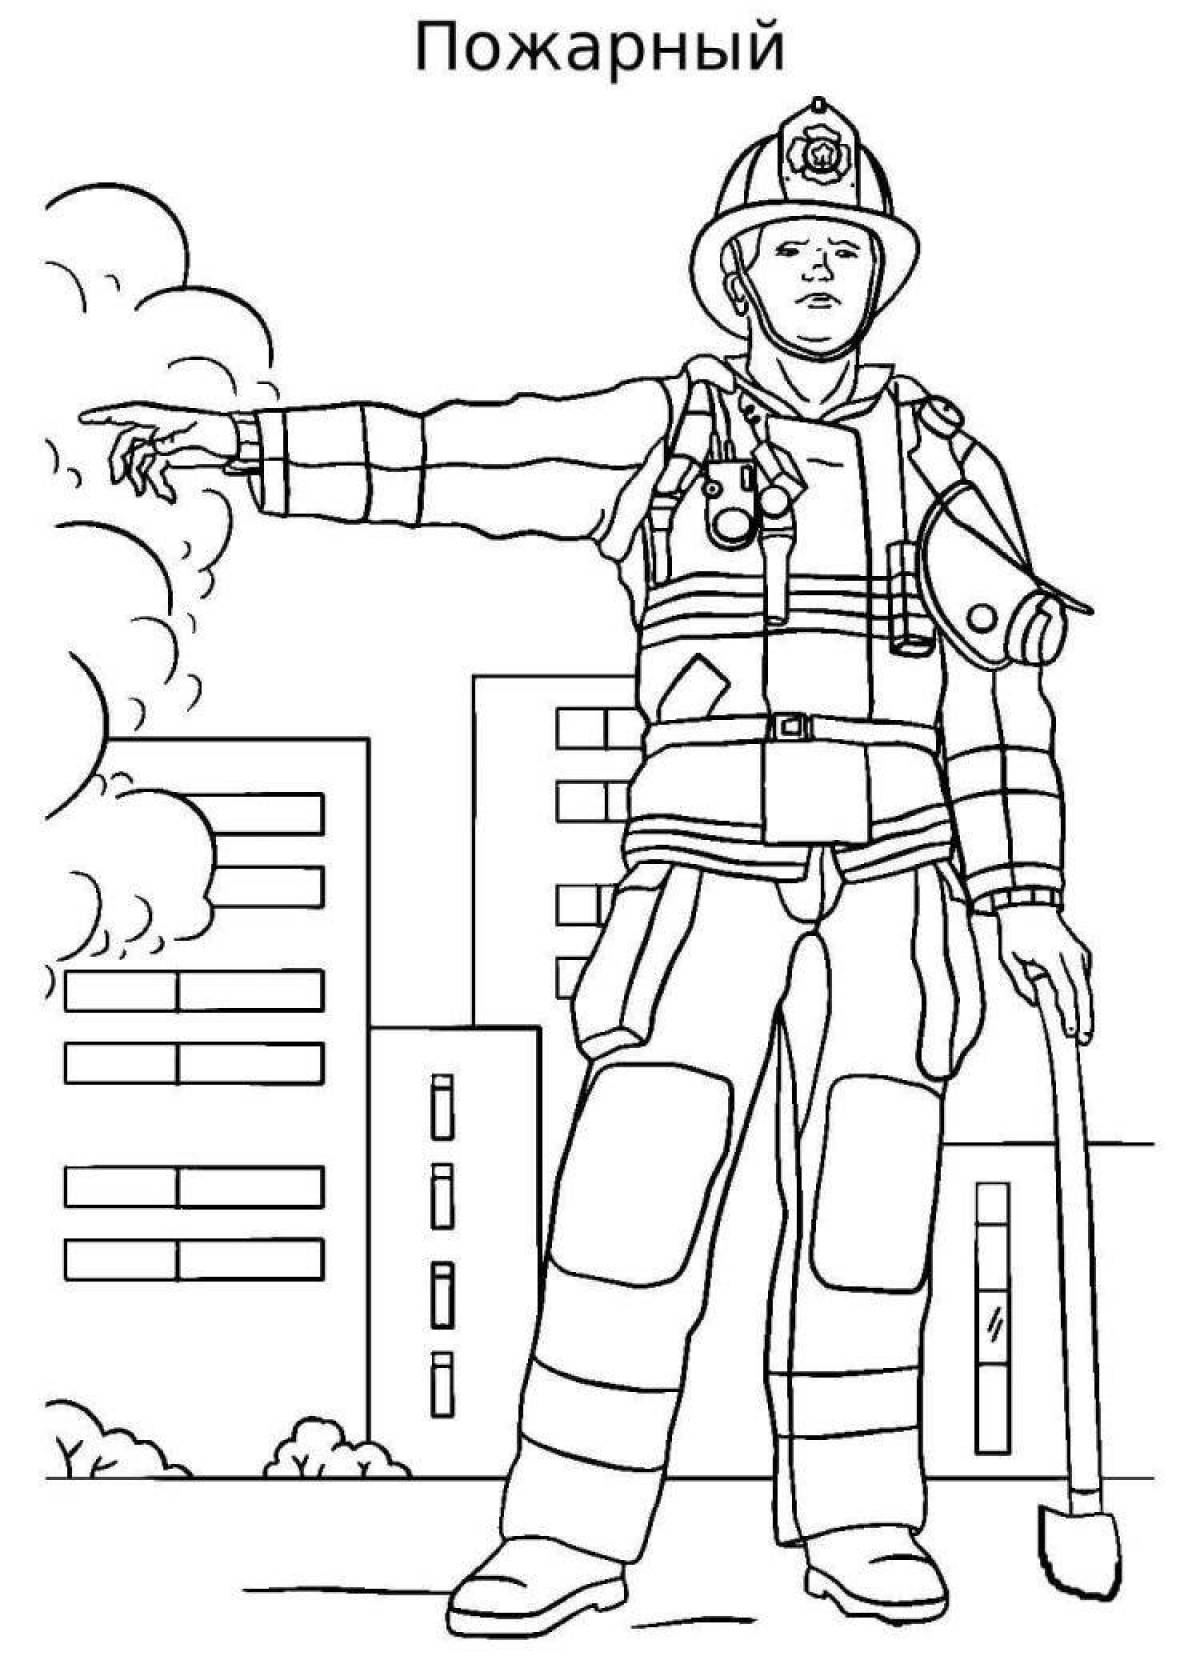 Coloring book joyful Ministry of Emergency Situations